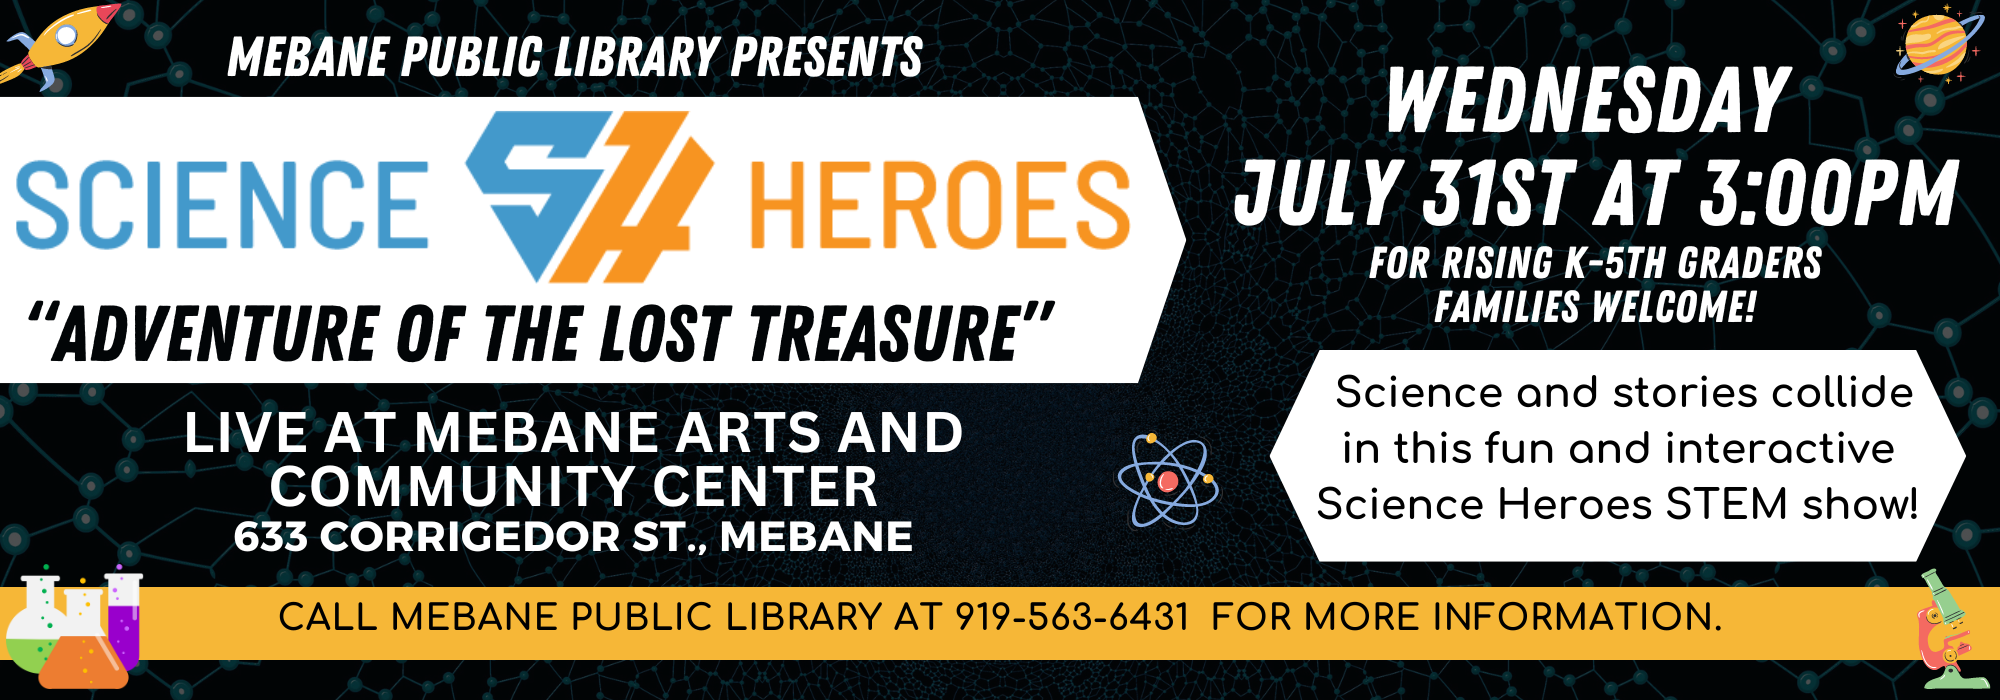 7.31 at 3 pm – Science Heroes at Mebane Arts and Community Center